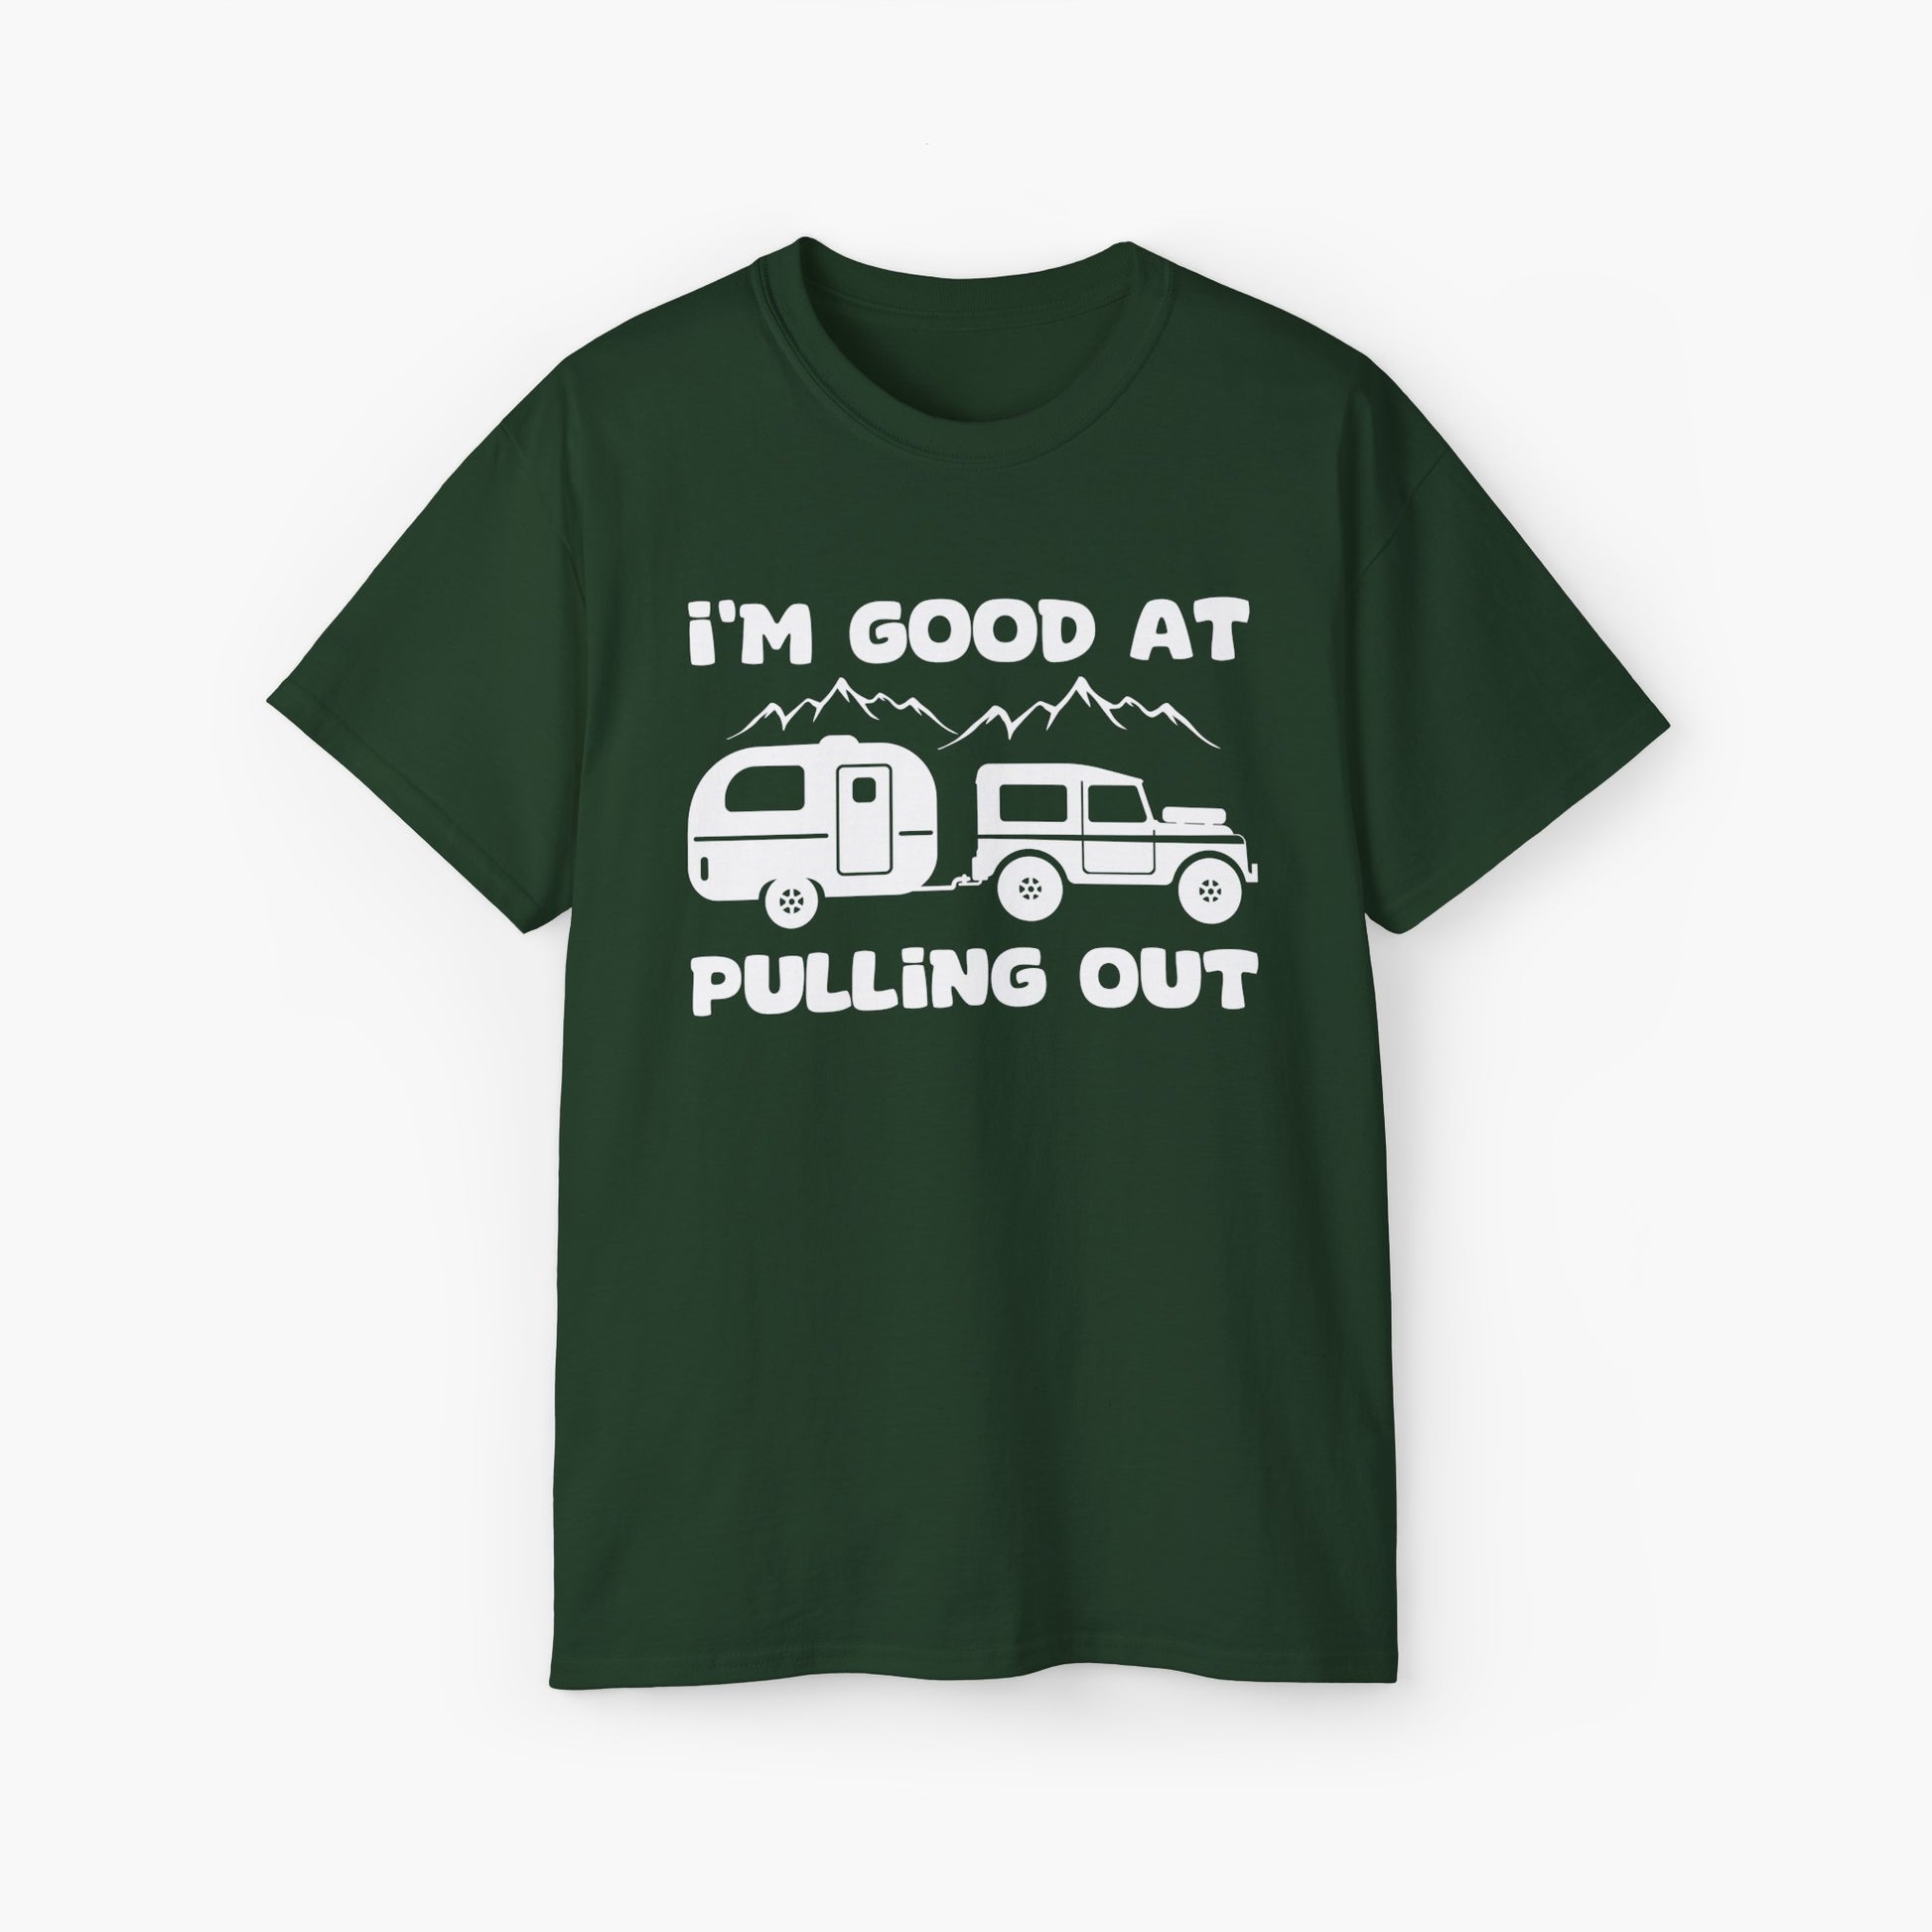 Green t-shirt with humorous text 'I'm good at pulling out' featuring an image of a truck pulling a camping van, set against mountains on a plain background.